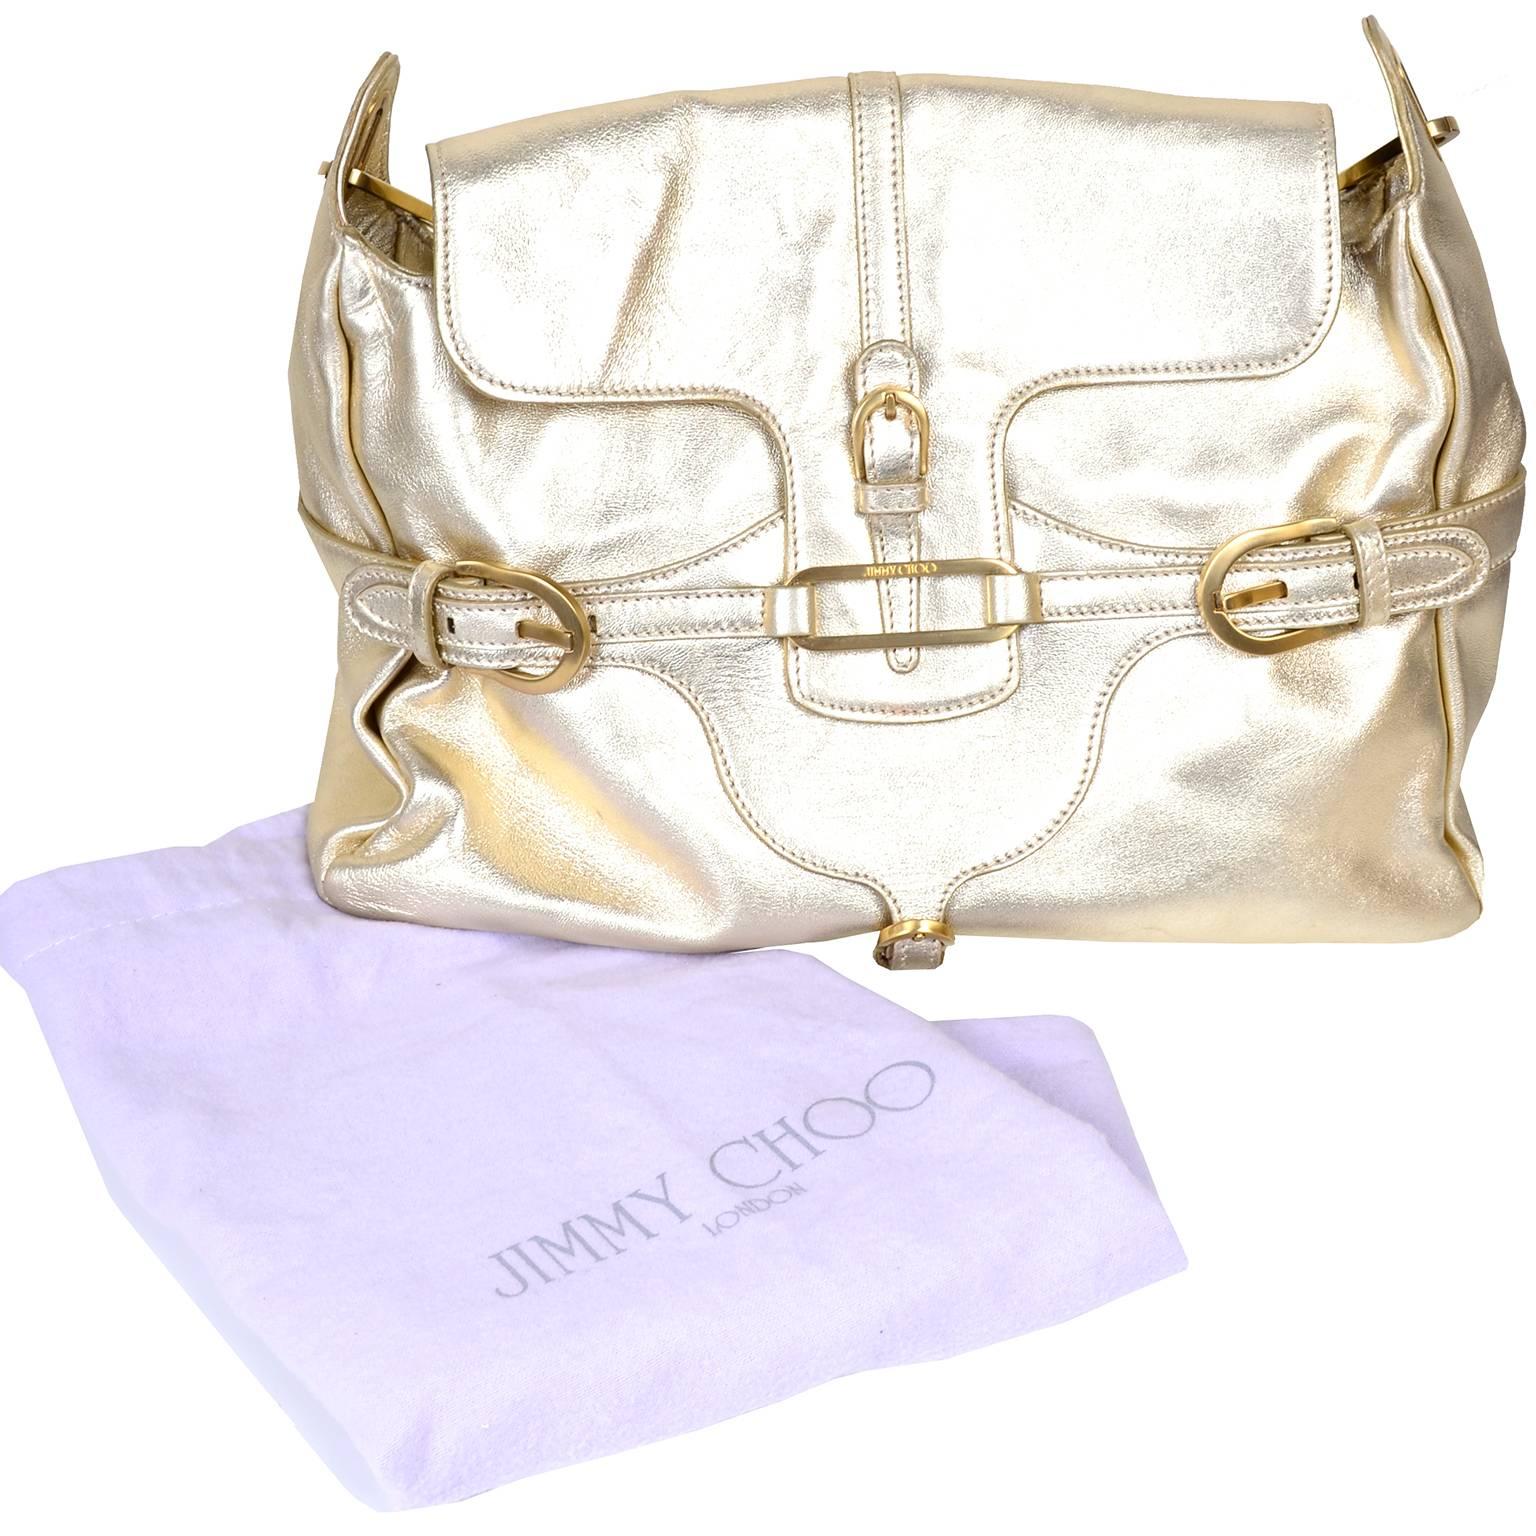 This is a great late 1990s or early 2000s Jimmy Choo gold metallic leather handbag with wonderful gold hardware.  The bag has 3 inside flap pockets, one zip pocket and its original dust bag. This bag measures 14” across at the bottom, 10” high and